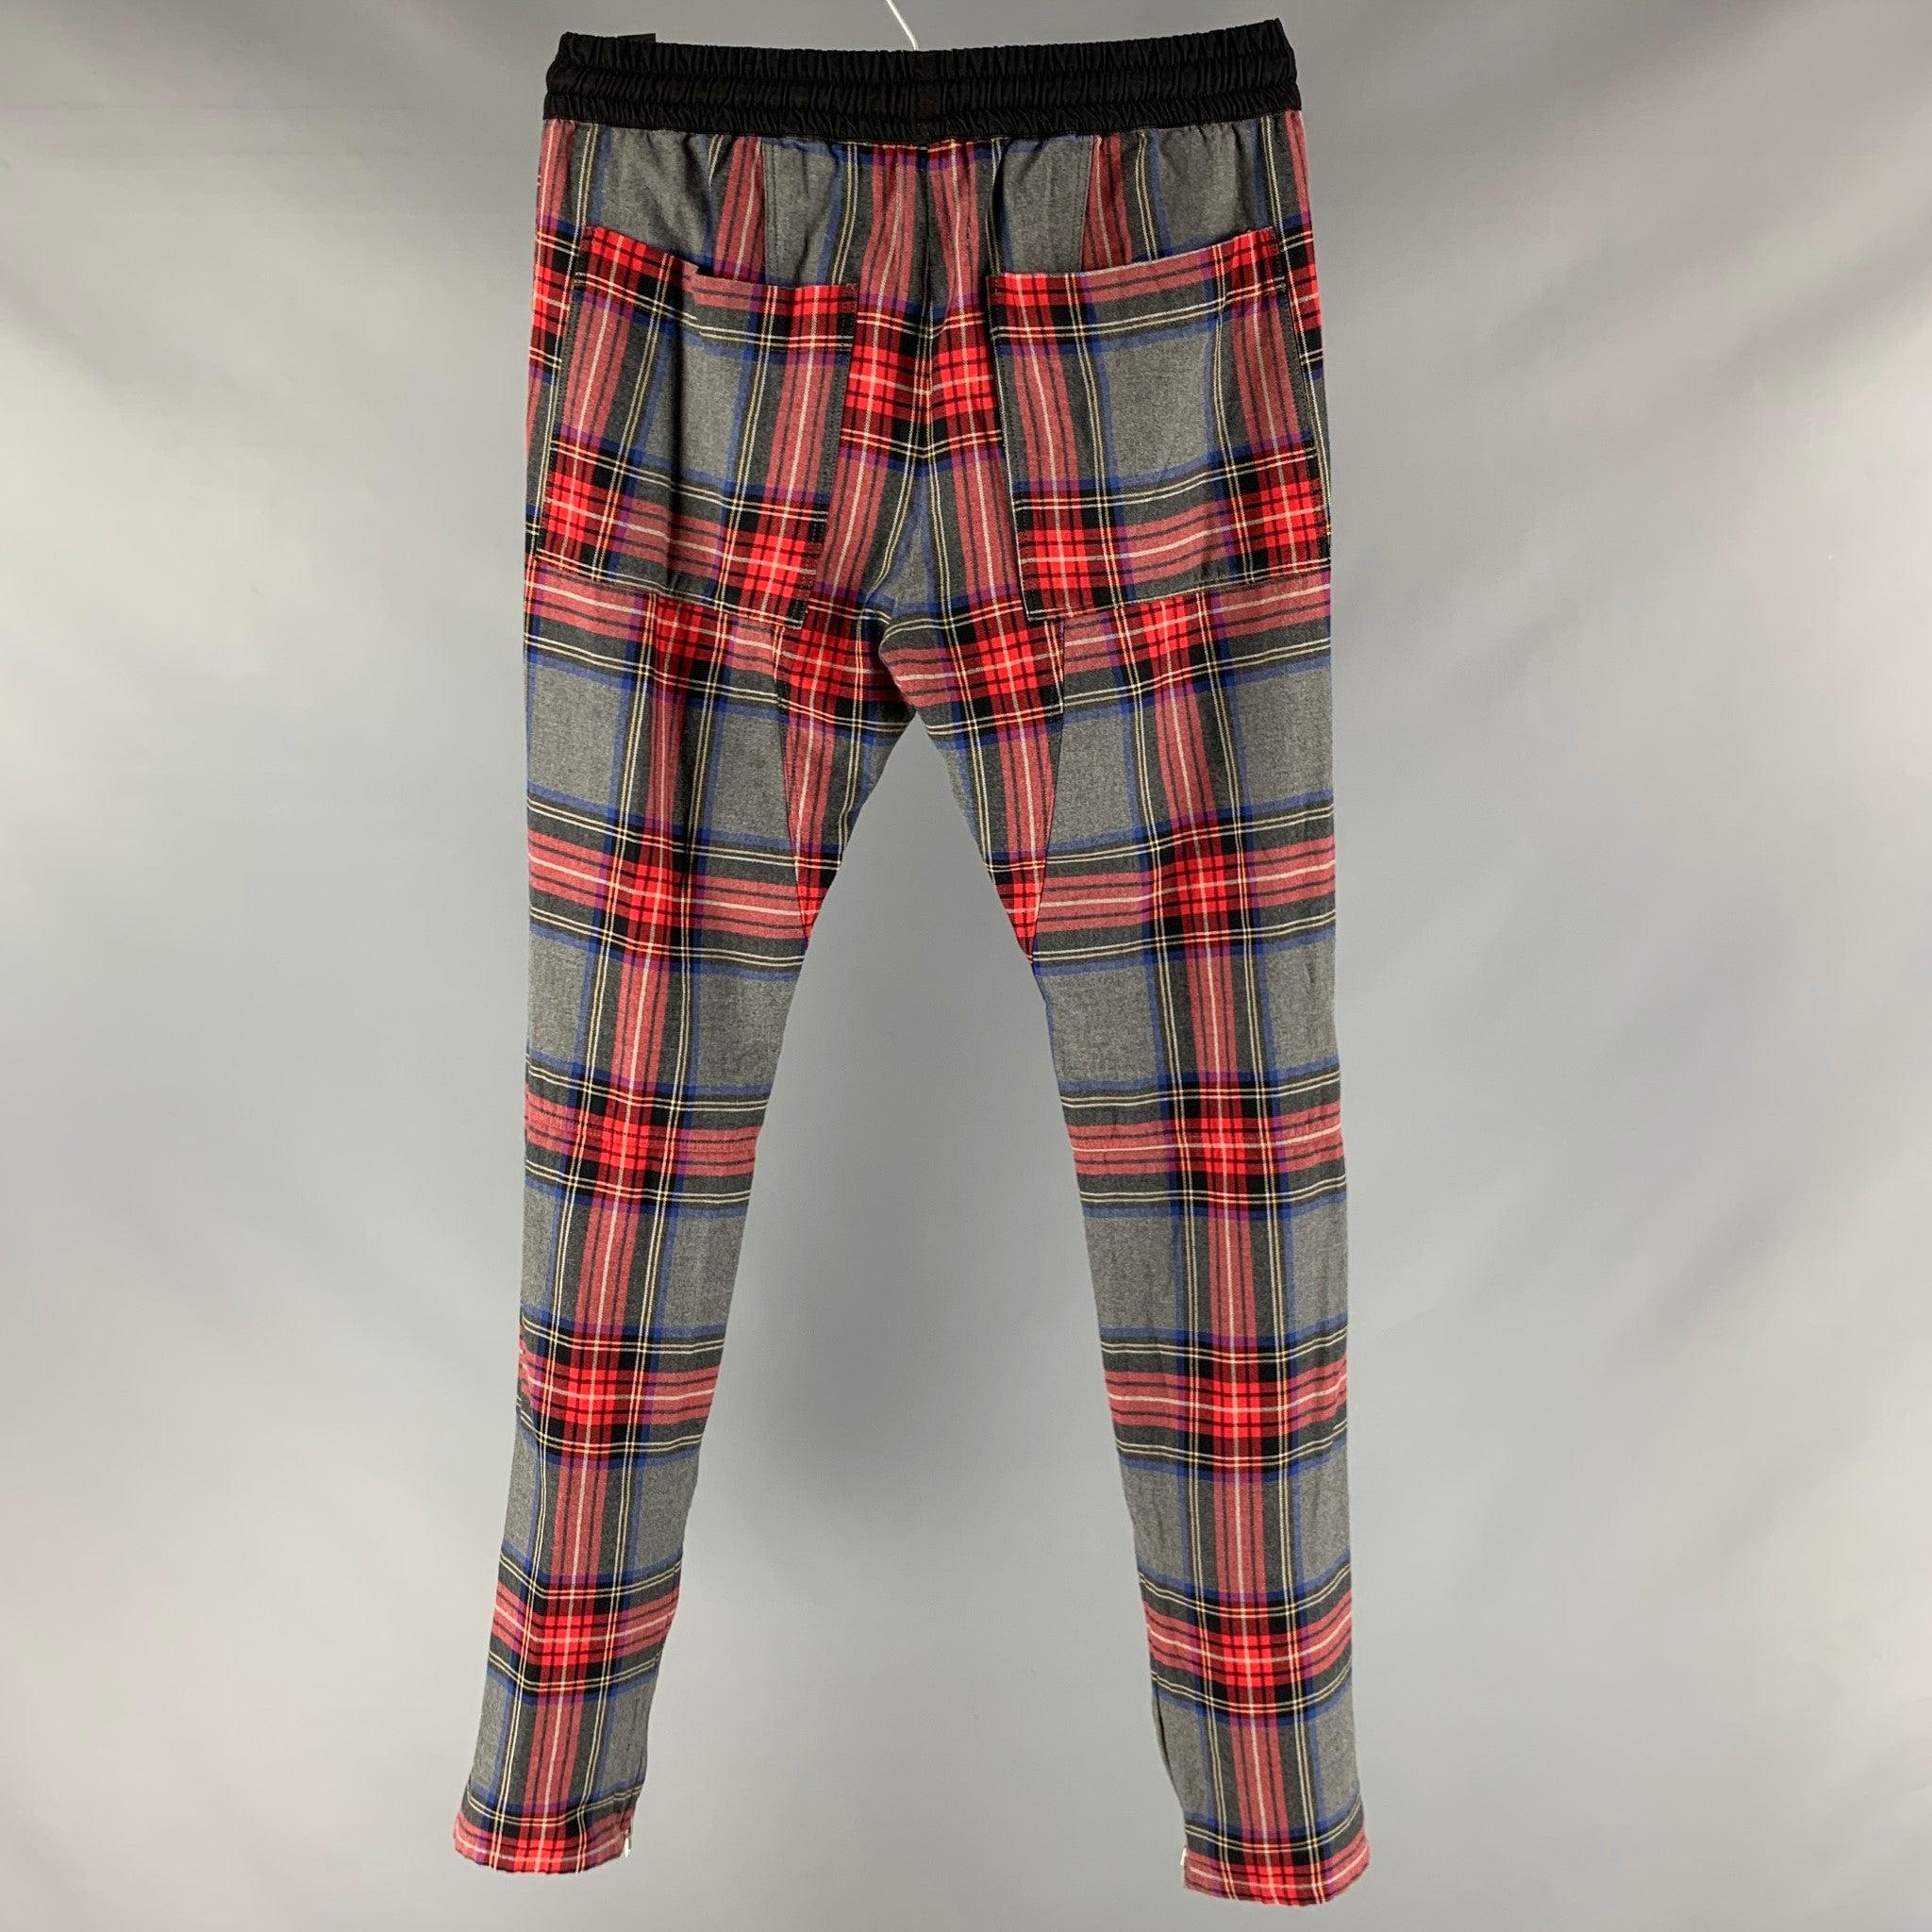 FEAR OF GOD Size S Grey Red Plaid Drawstring Casual Pants In Excellent Condition For Sale In San Francisco, CA